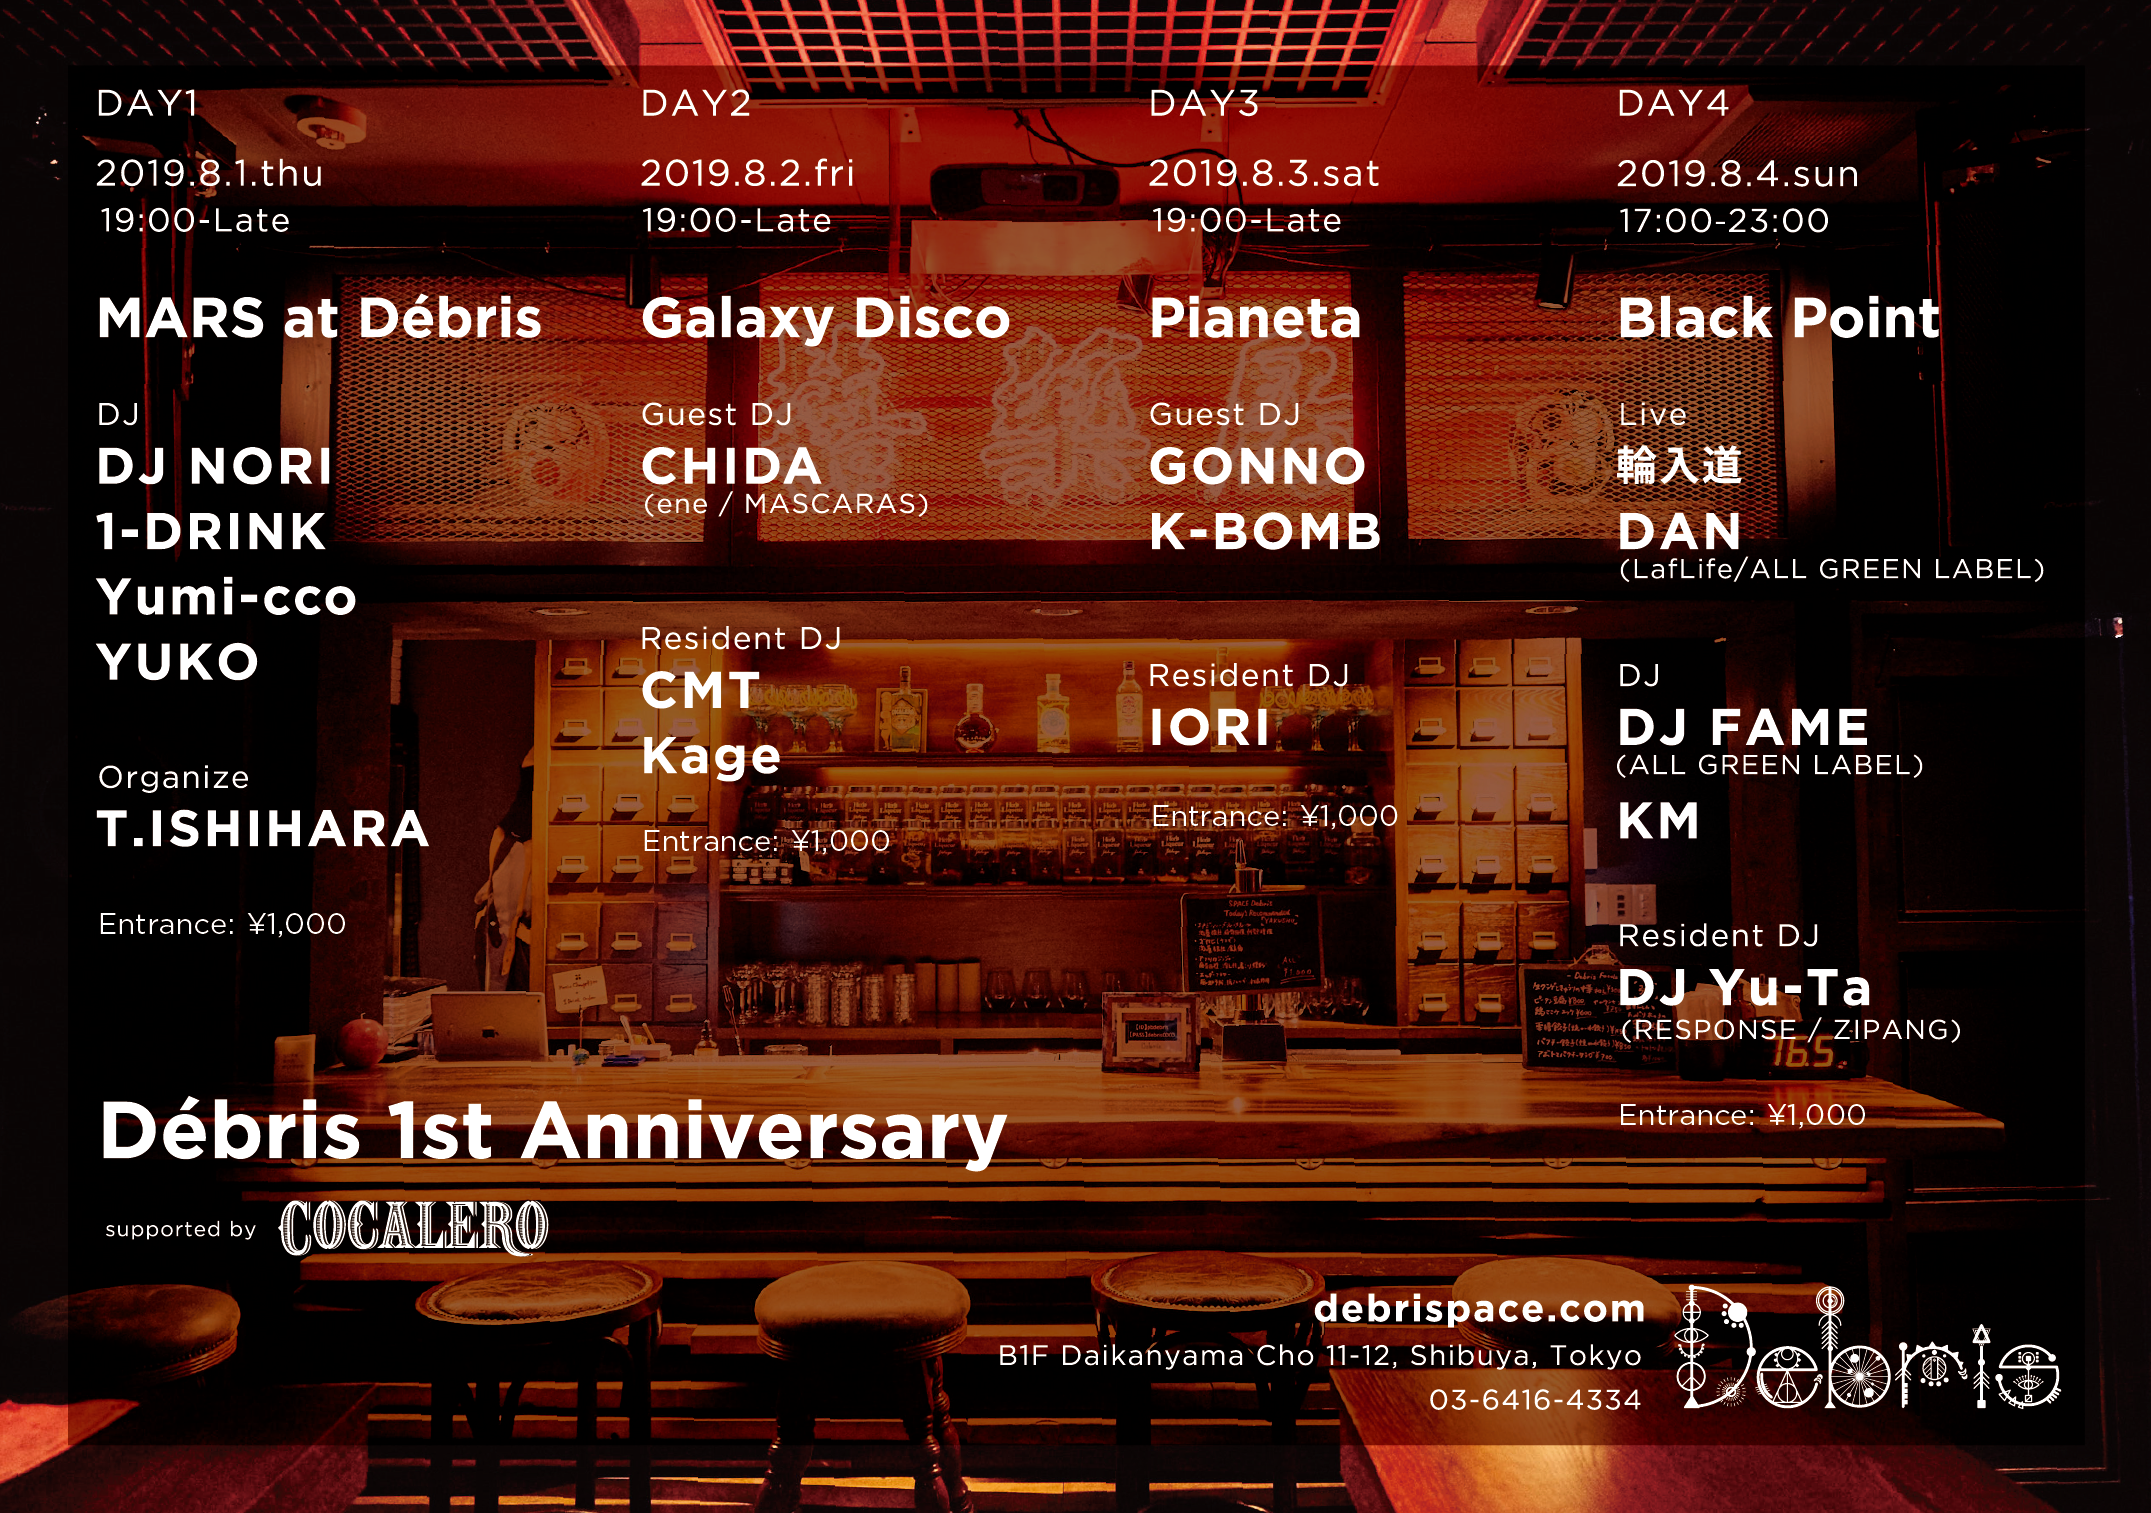 Pianeta〜Débris 1st Annversary DAY3〜supported by Cocalero